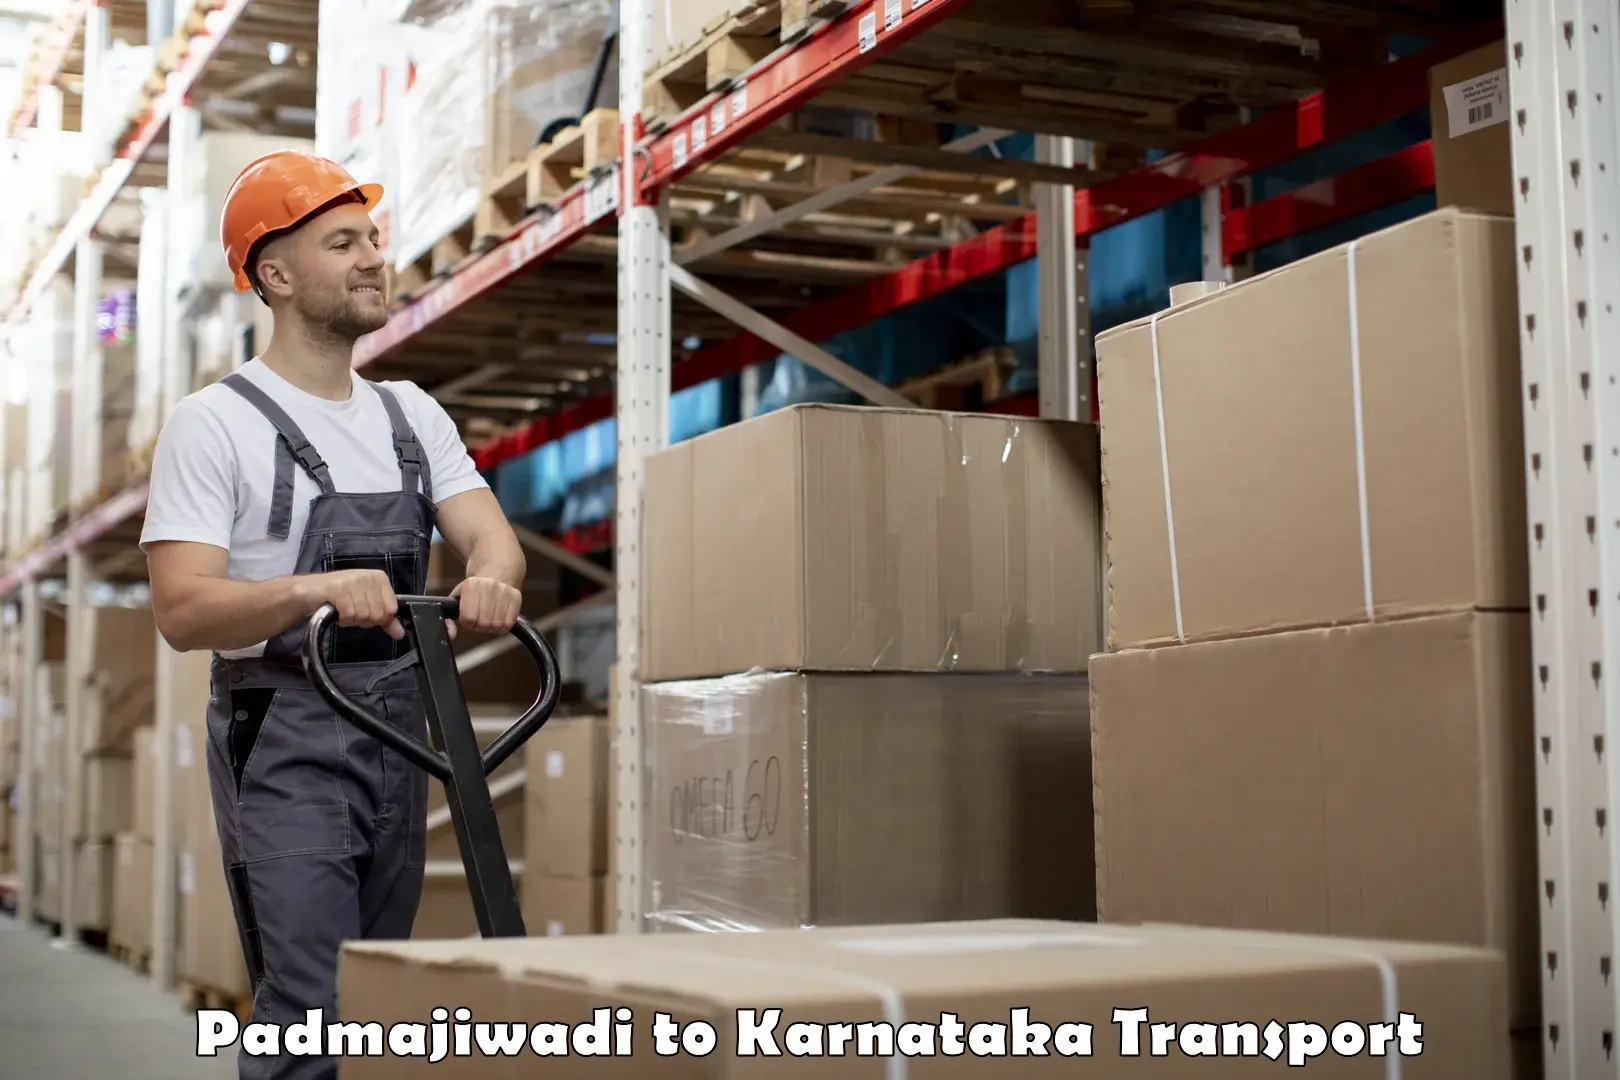 Goods delivery service Padmajiwadi to Manipal